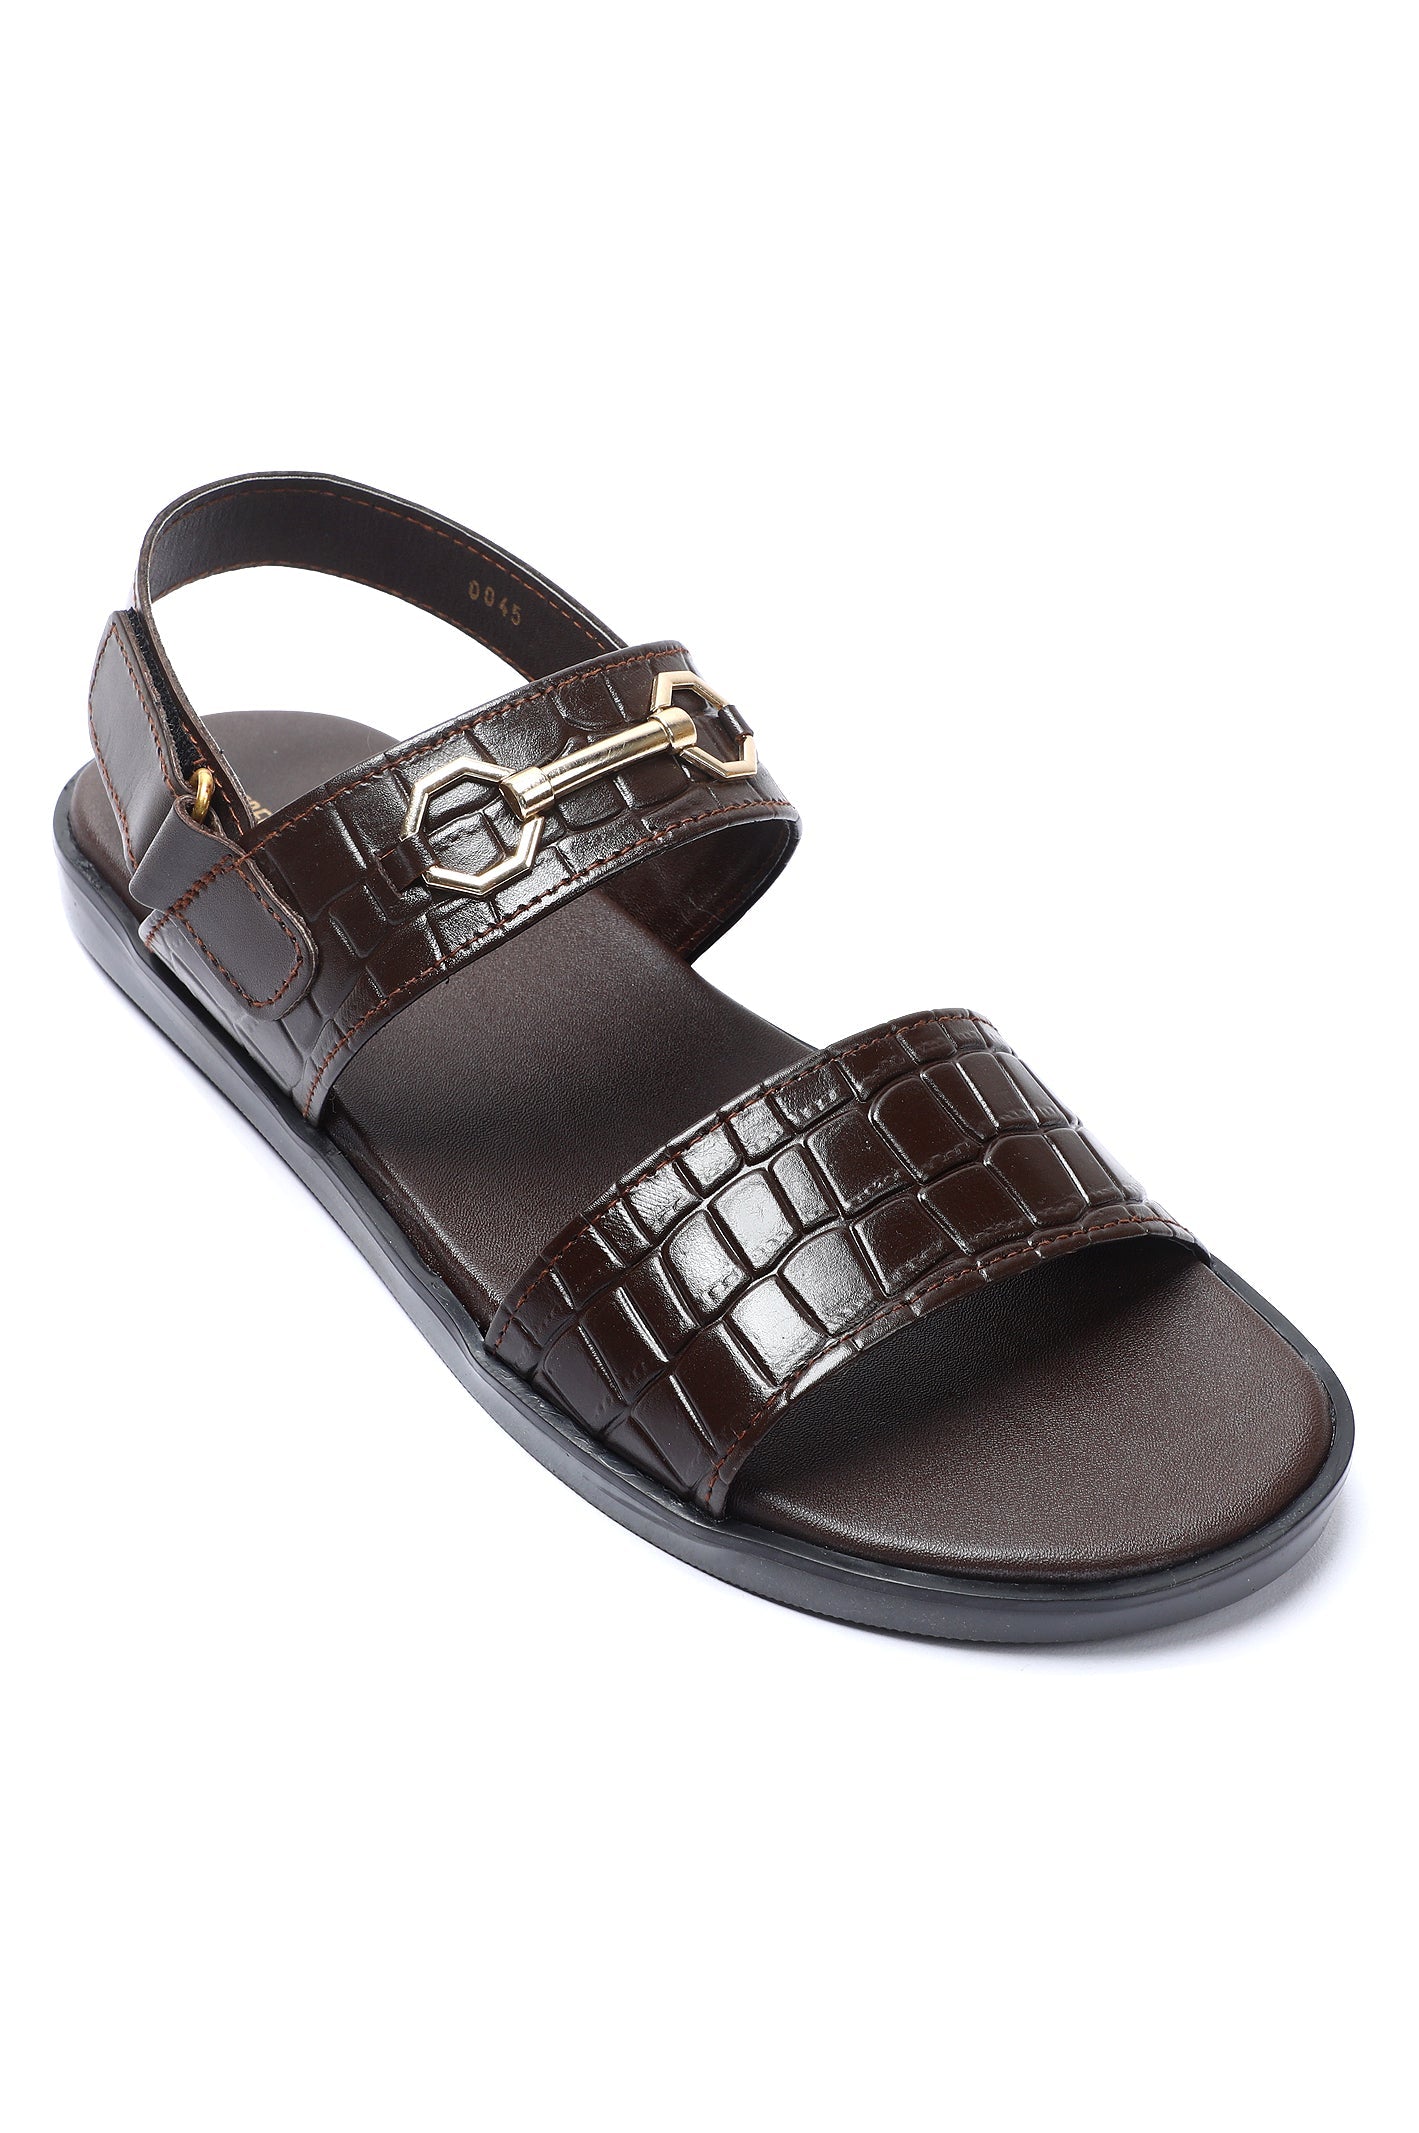 French Emporio Men's Sandal SKU: SLD-0045-COFFEE - Diners